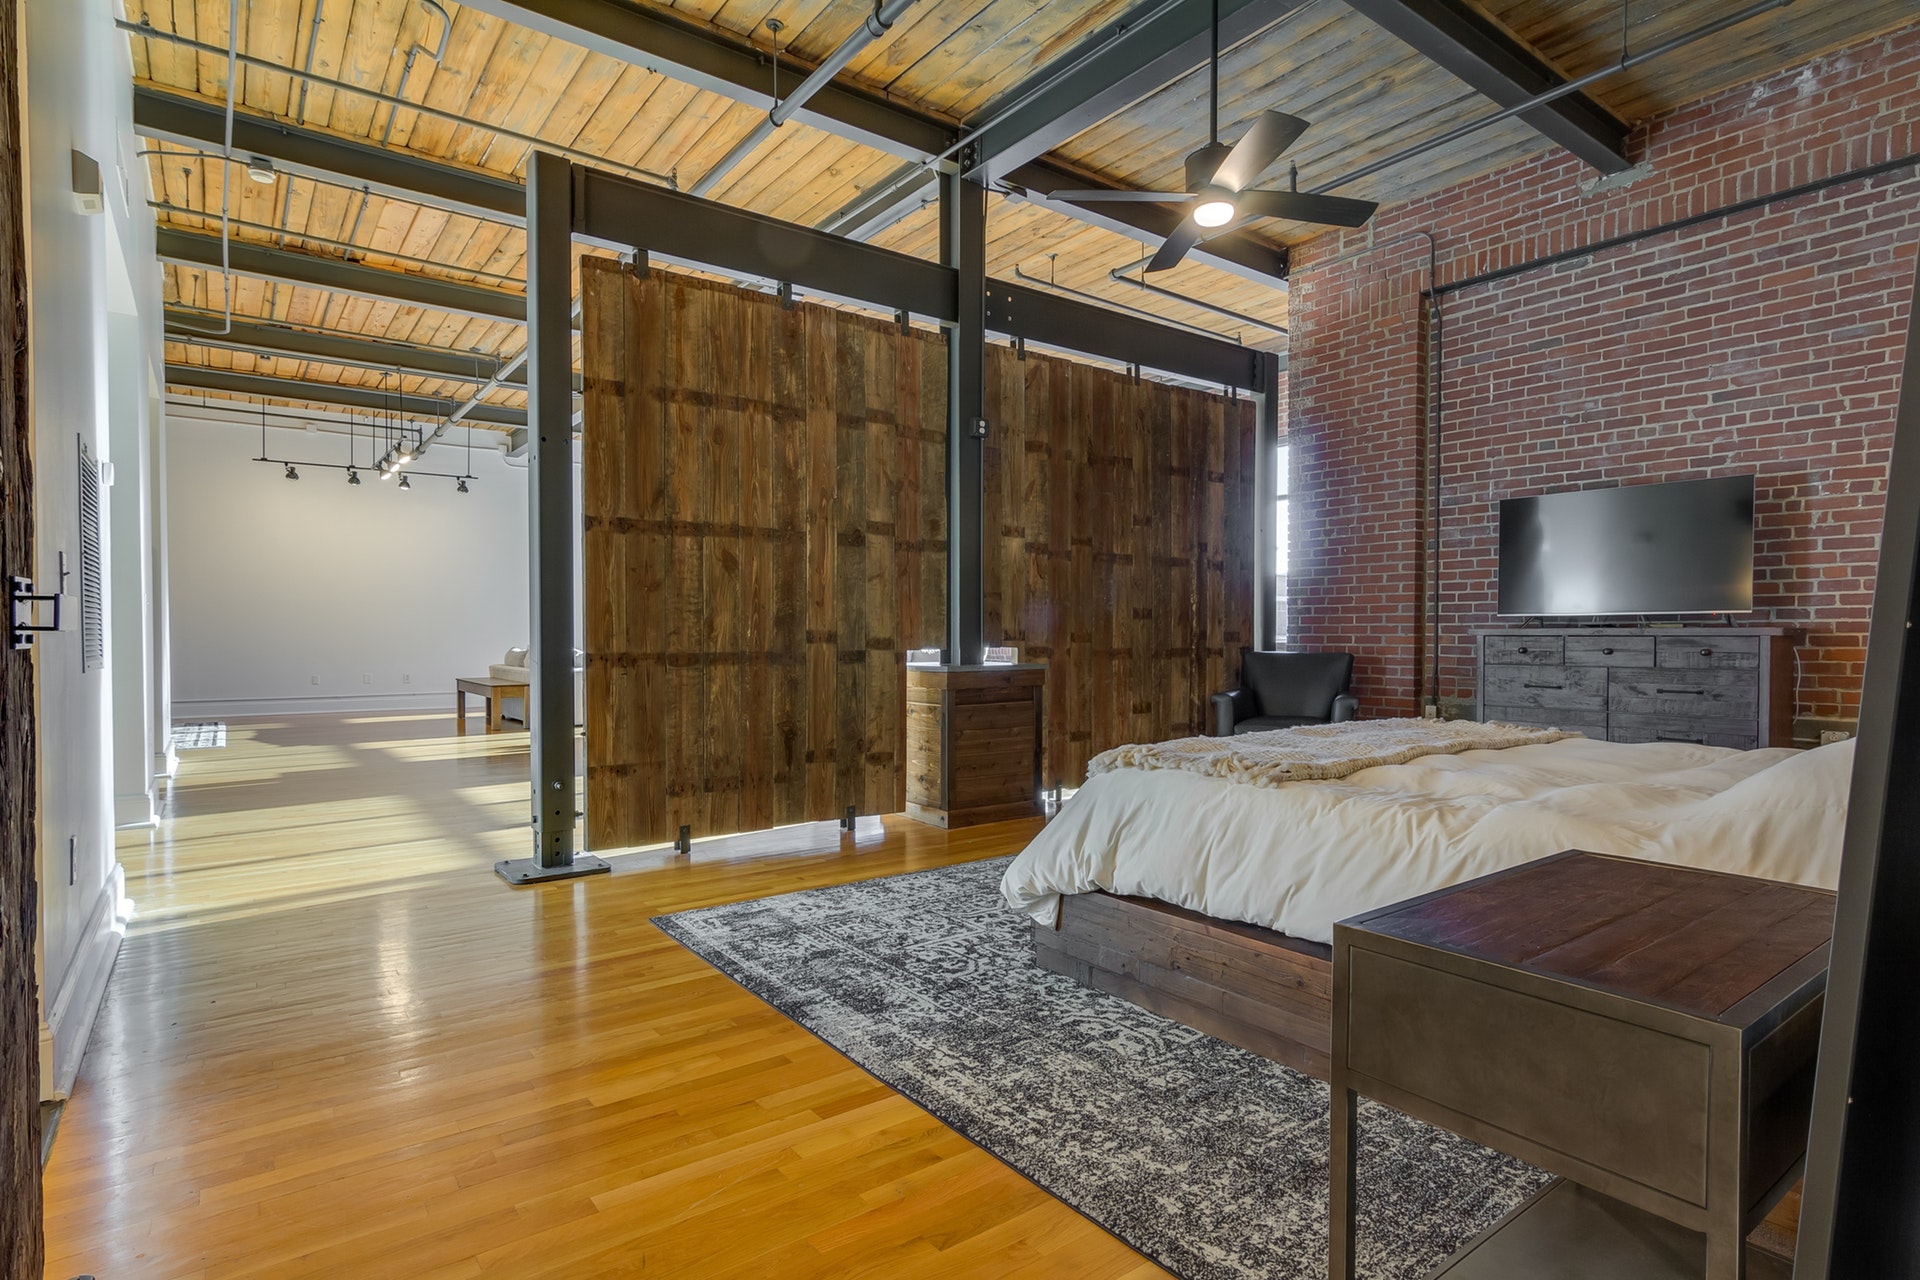 Bedroom with red brick wall light wood floors wood ceilings with exposed pipes wooden partition